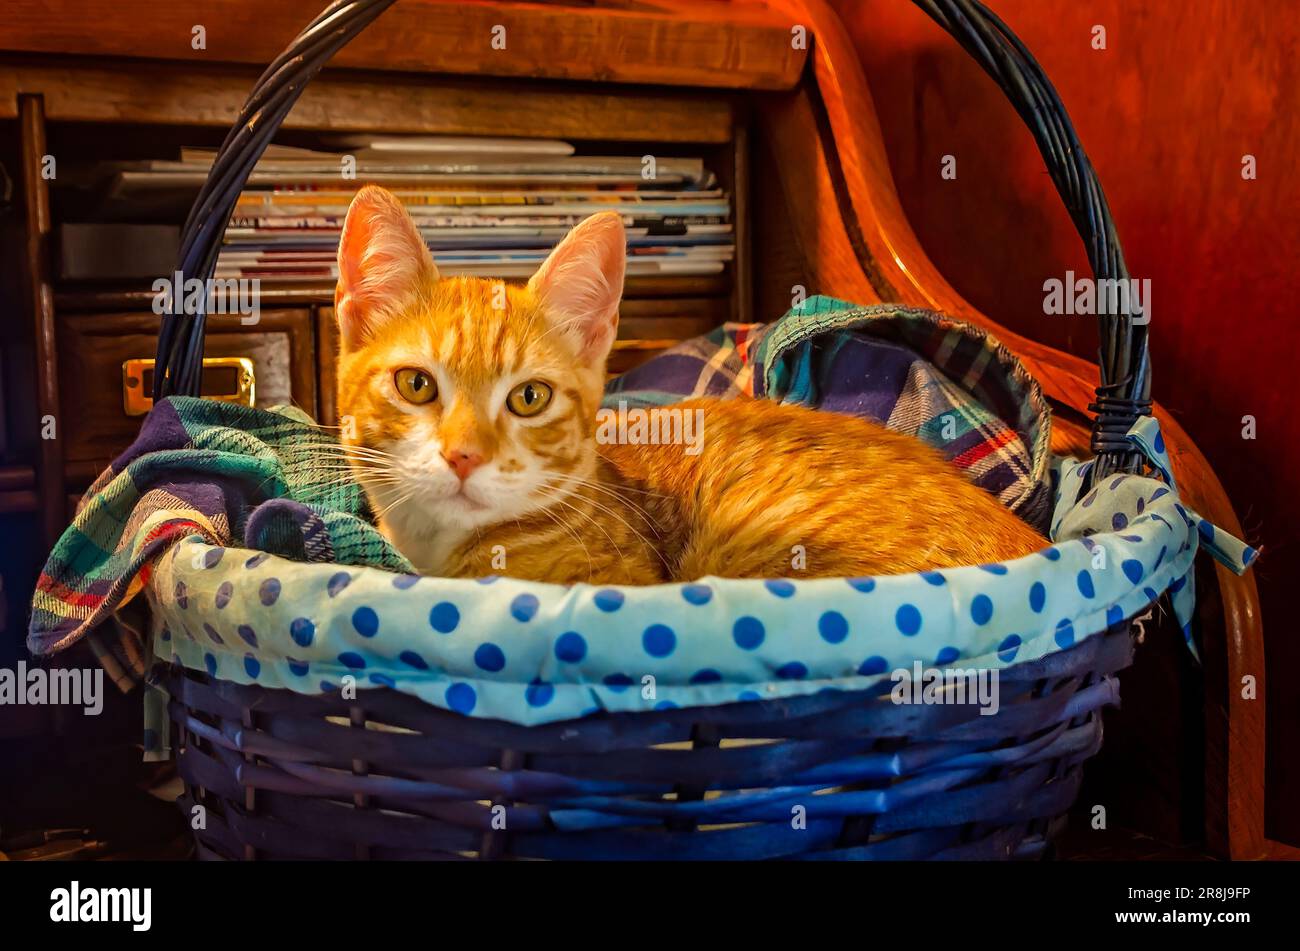 Wolfie, an 8-week-old orange and white kitten, lays in a basket, June 7, 2023, in Coden, Alabama. Orange and white kittens, also known as marmalade or Stock Photo